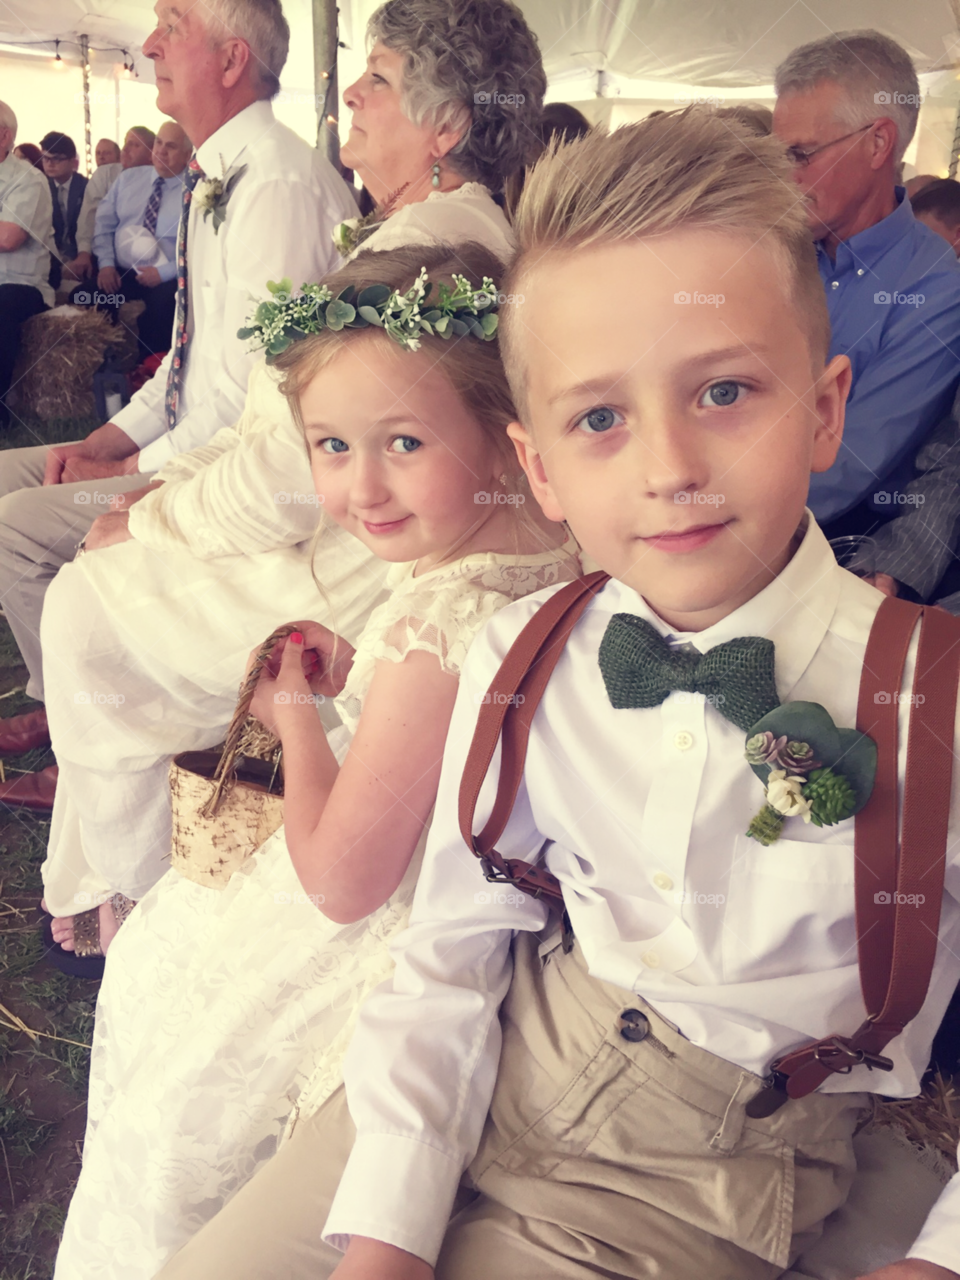 My niece and nephew as flower girl and ring bearer at my sisters wedding. How cute are they!